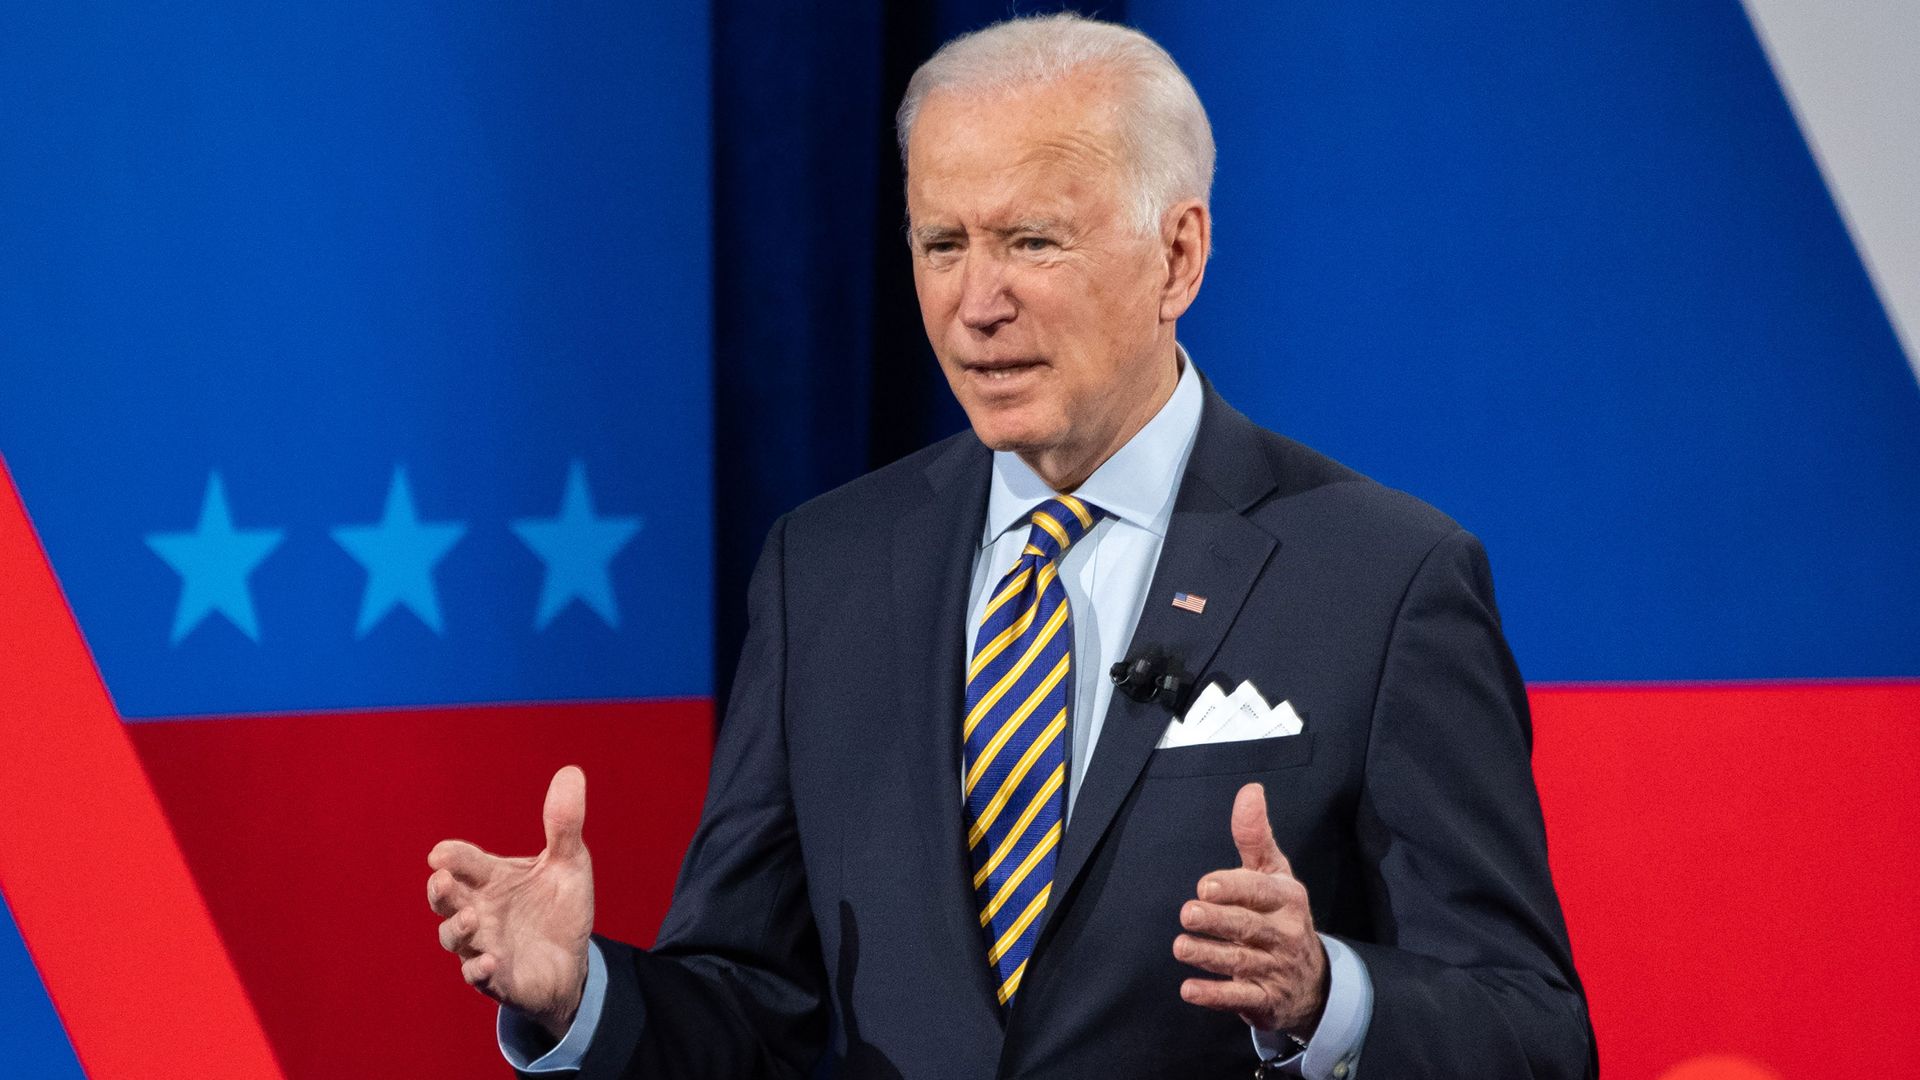  President Joe Biden participates in a CNN town hall at the Pabst Theater in Milwaukee, Wisconsin, February 16